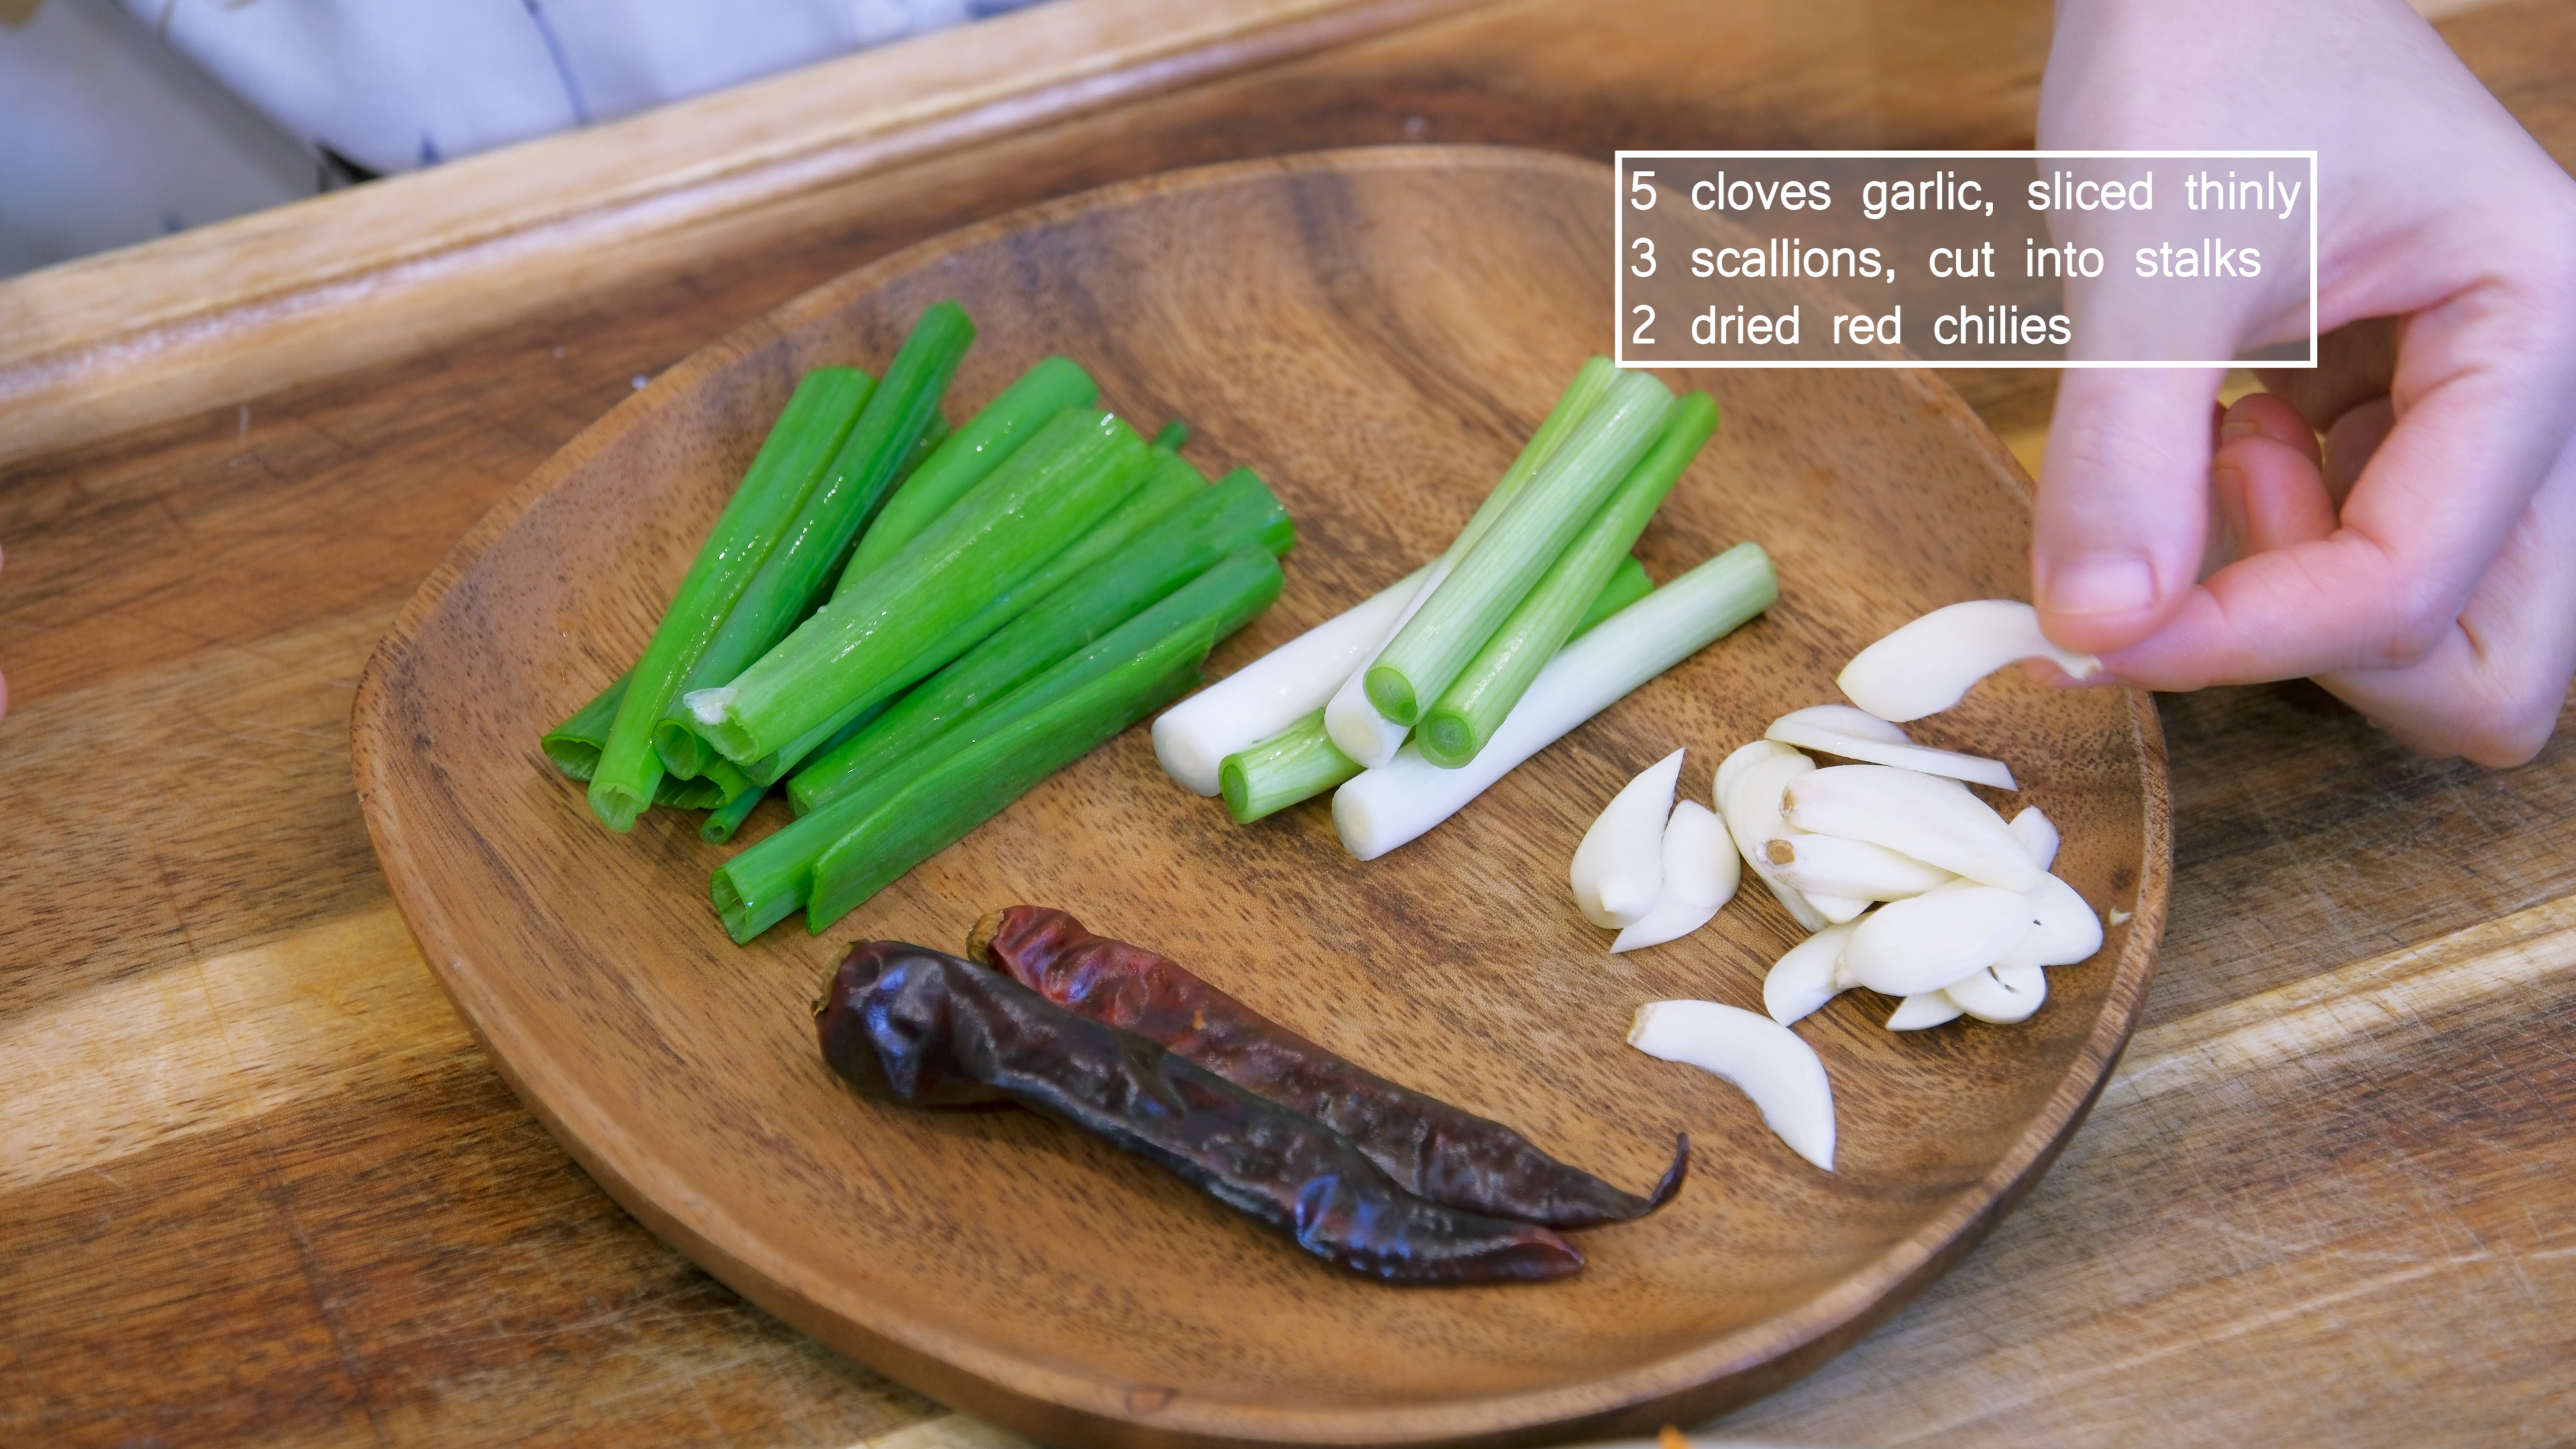 Image of Besides that, slice 5 cloves garlic thinly; cut 3 scallions...